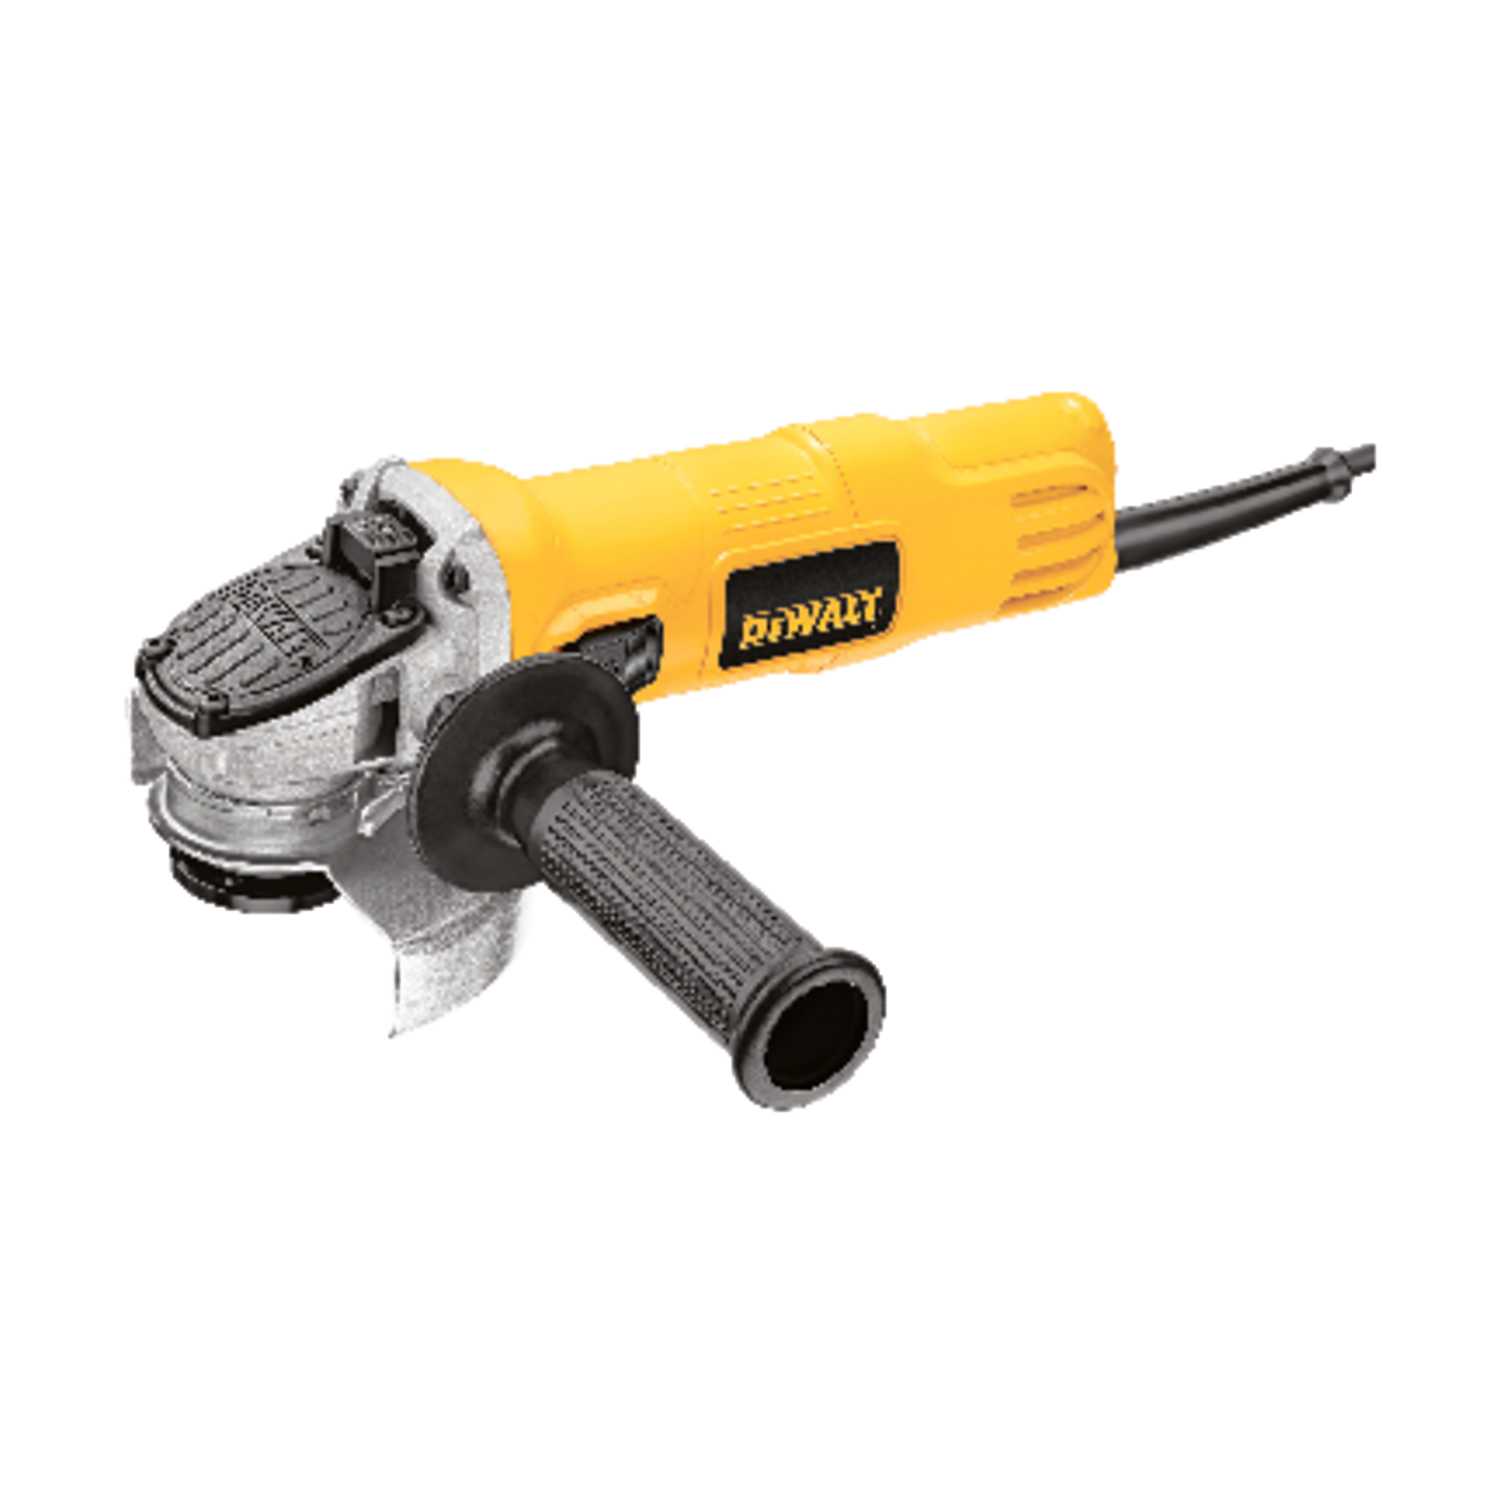 DeWalt 4 1 2 in Corded Small Angle Grinder  7 amps 12000 